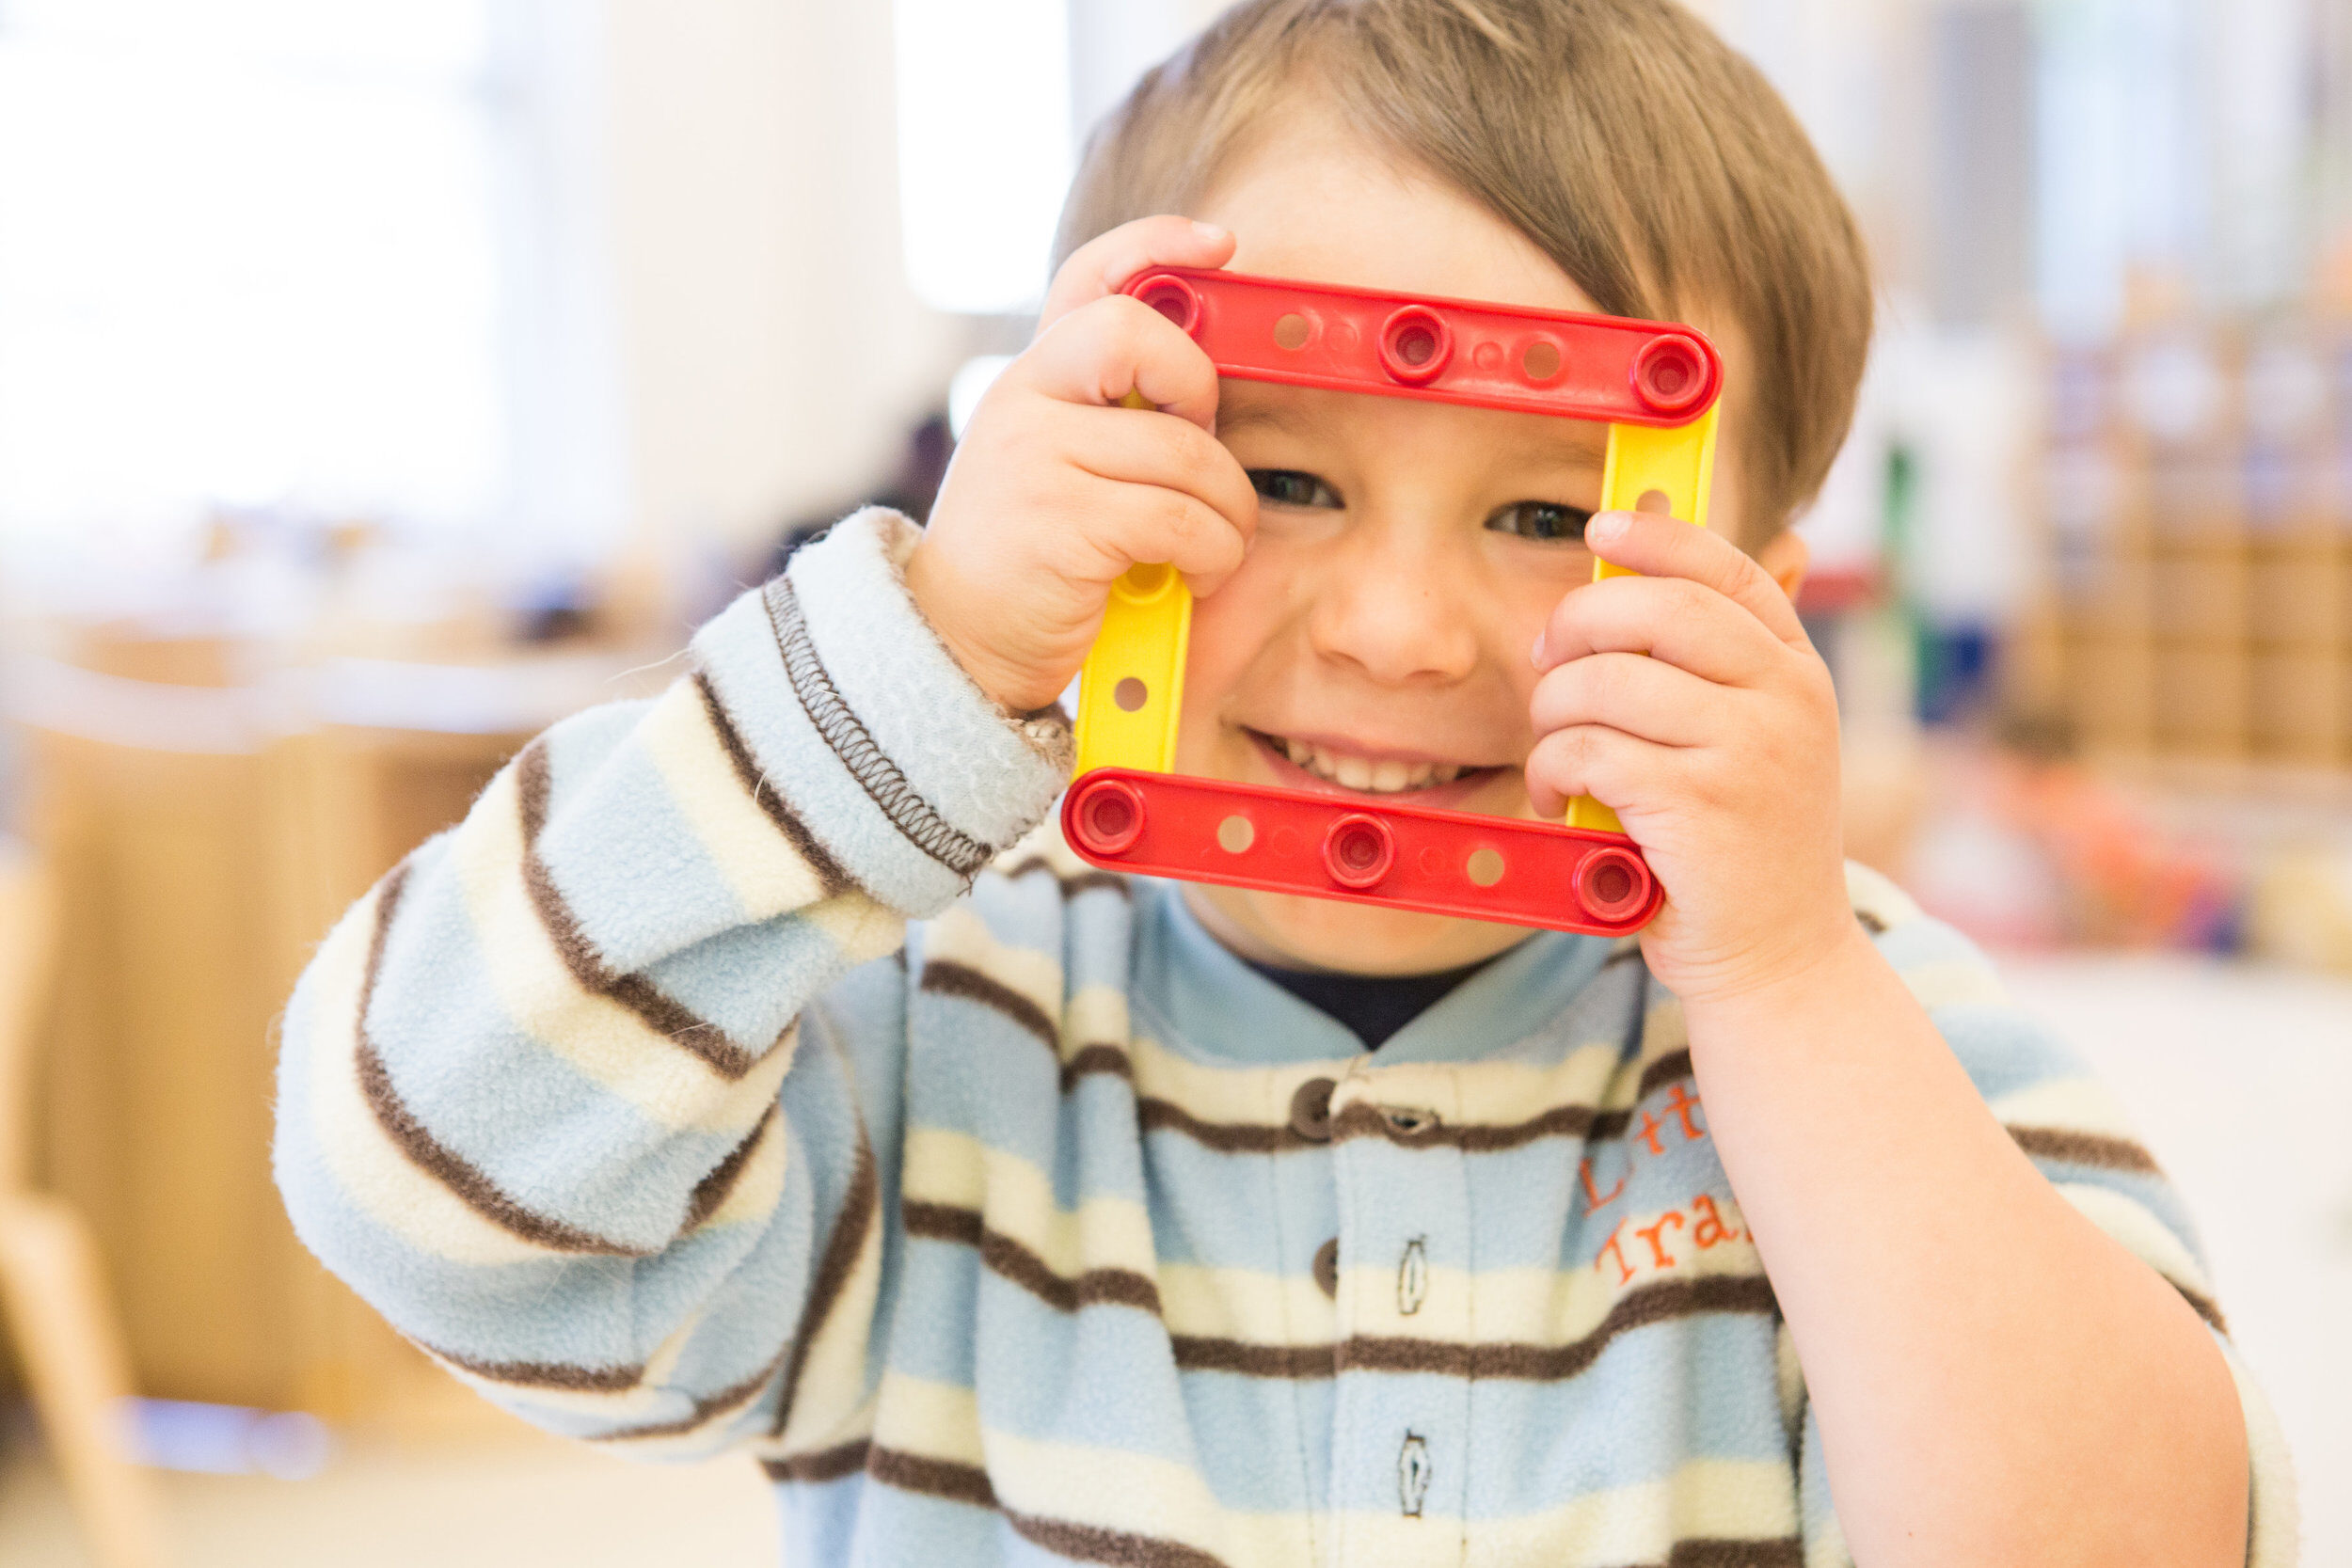 Early childhood educators have always recognized how building with blocks (and similar hands-on activities) help children develop motor skills while at the same time exercising their creativity. But these activities can also be framed as authentic e…